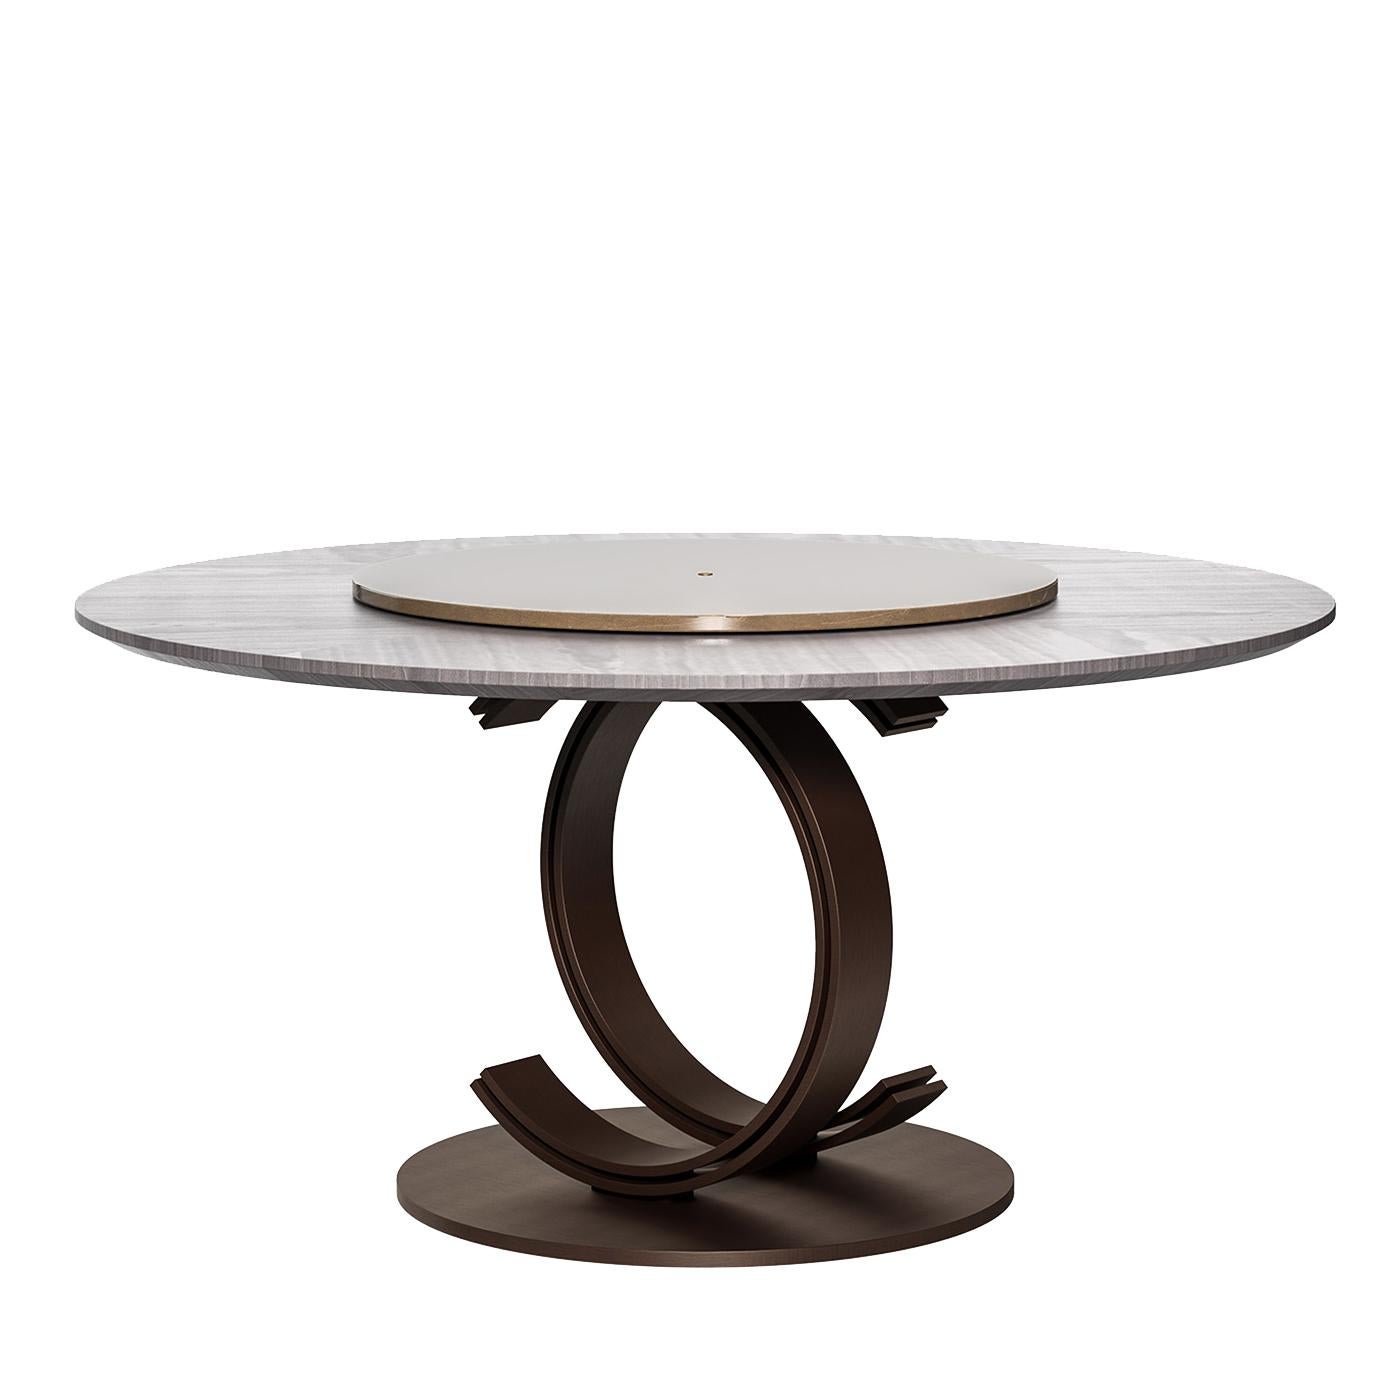 built in lazy susan table